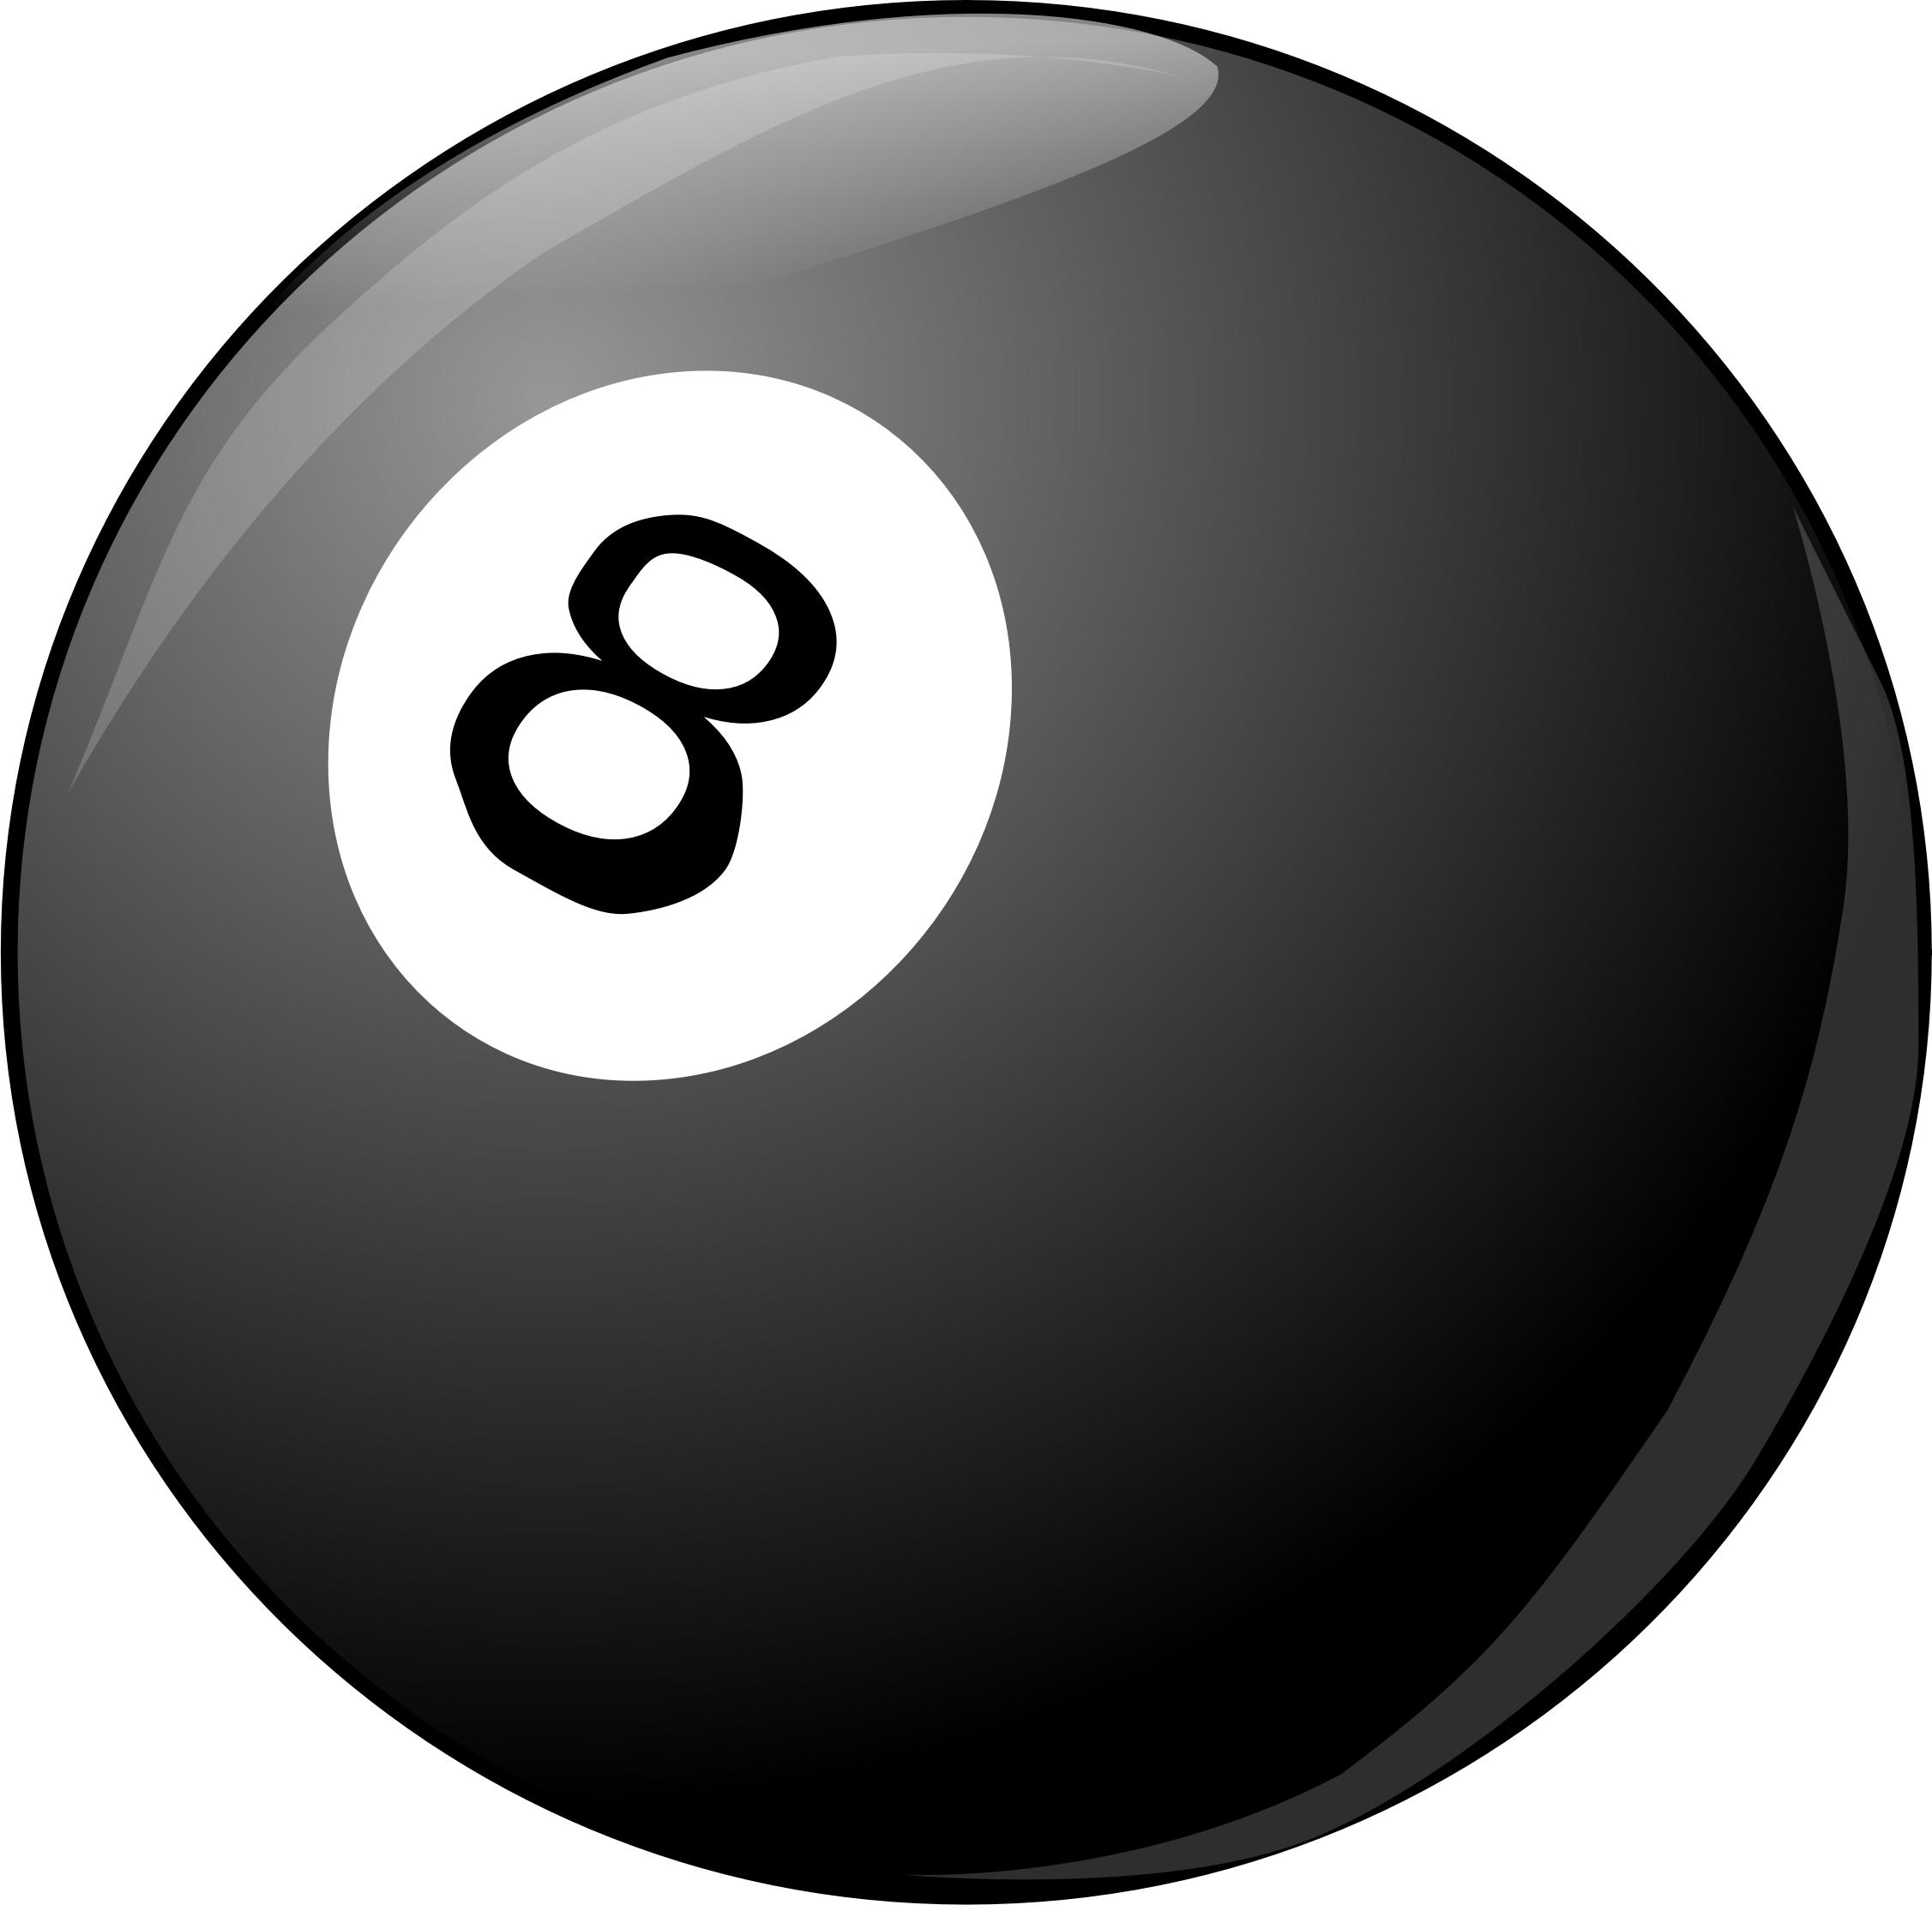 8Ball noShadow PNG icons